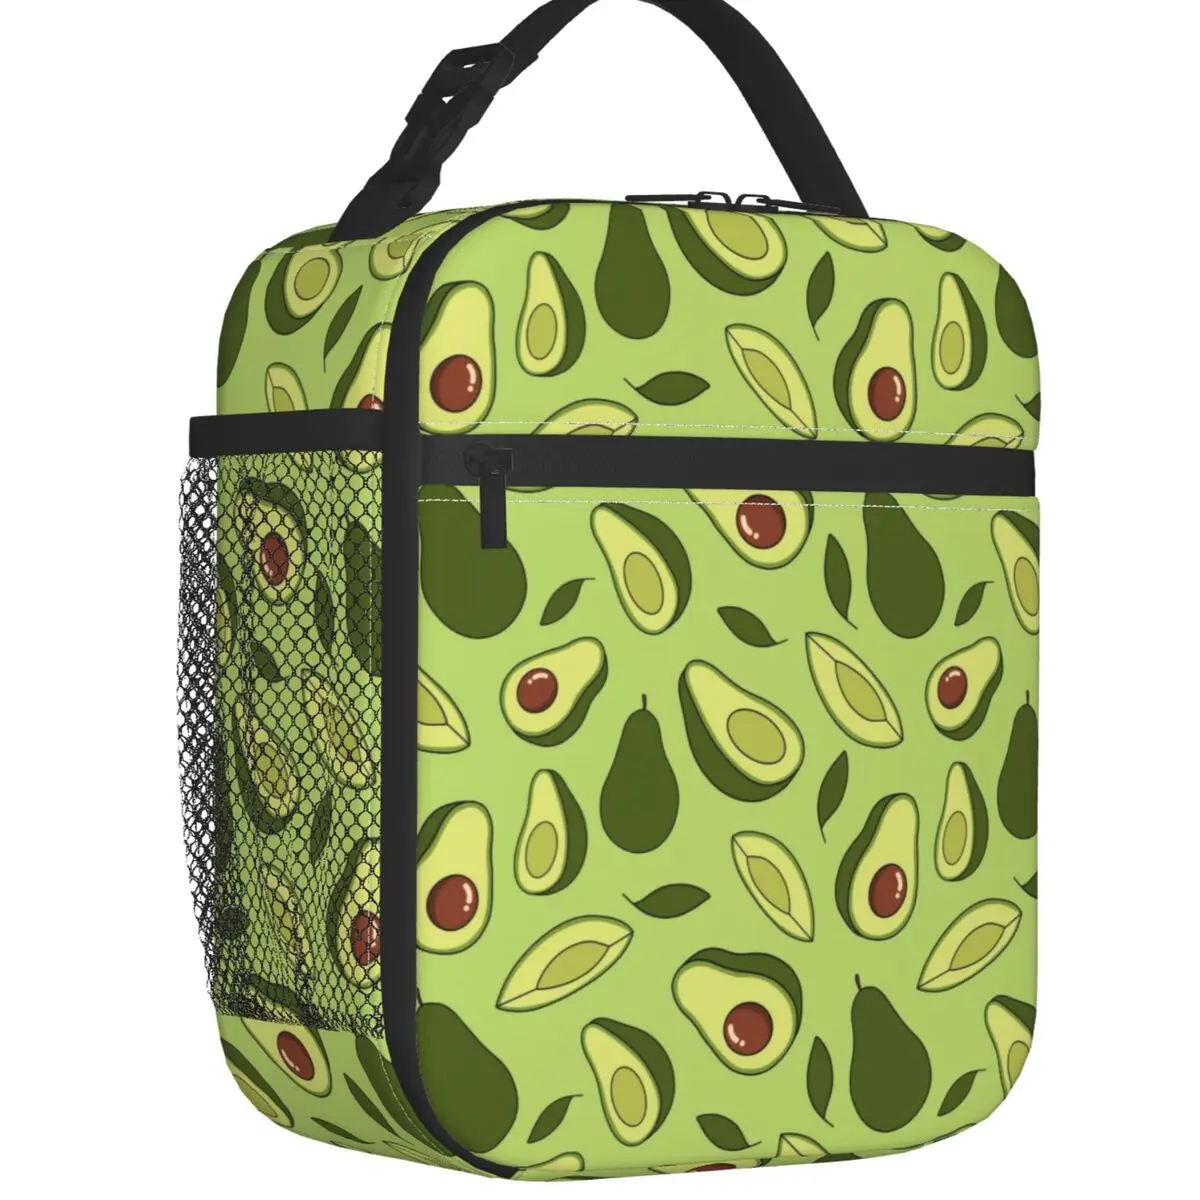 Green Avocado Print Insulated Lunch Bag for Women Leakproof Thermal Cooler Bento Box Office Work School